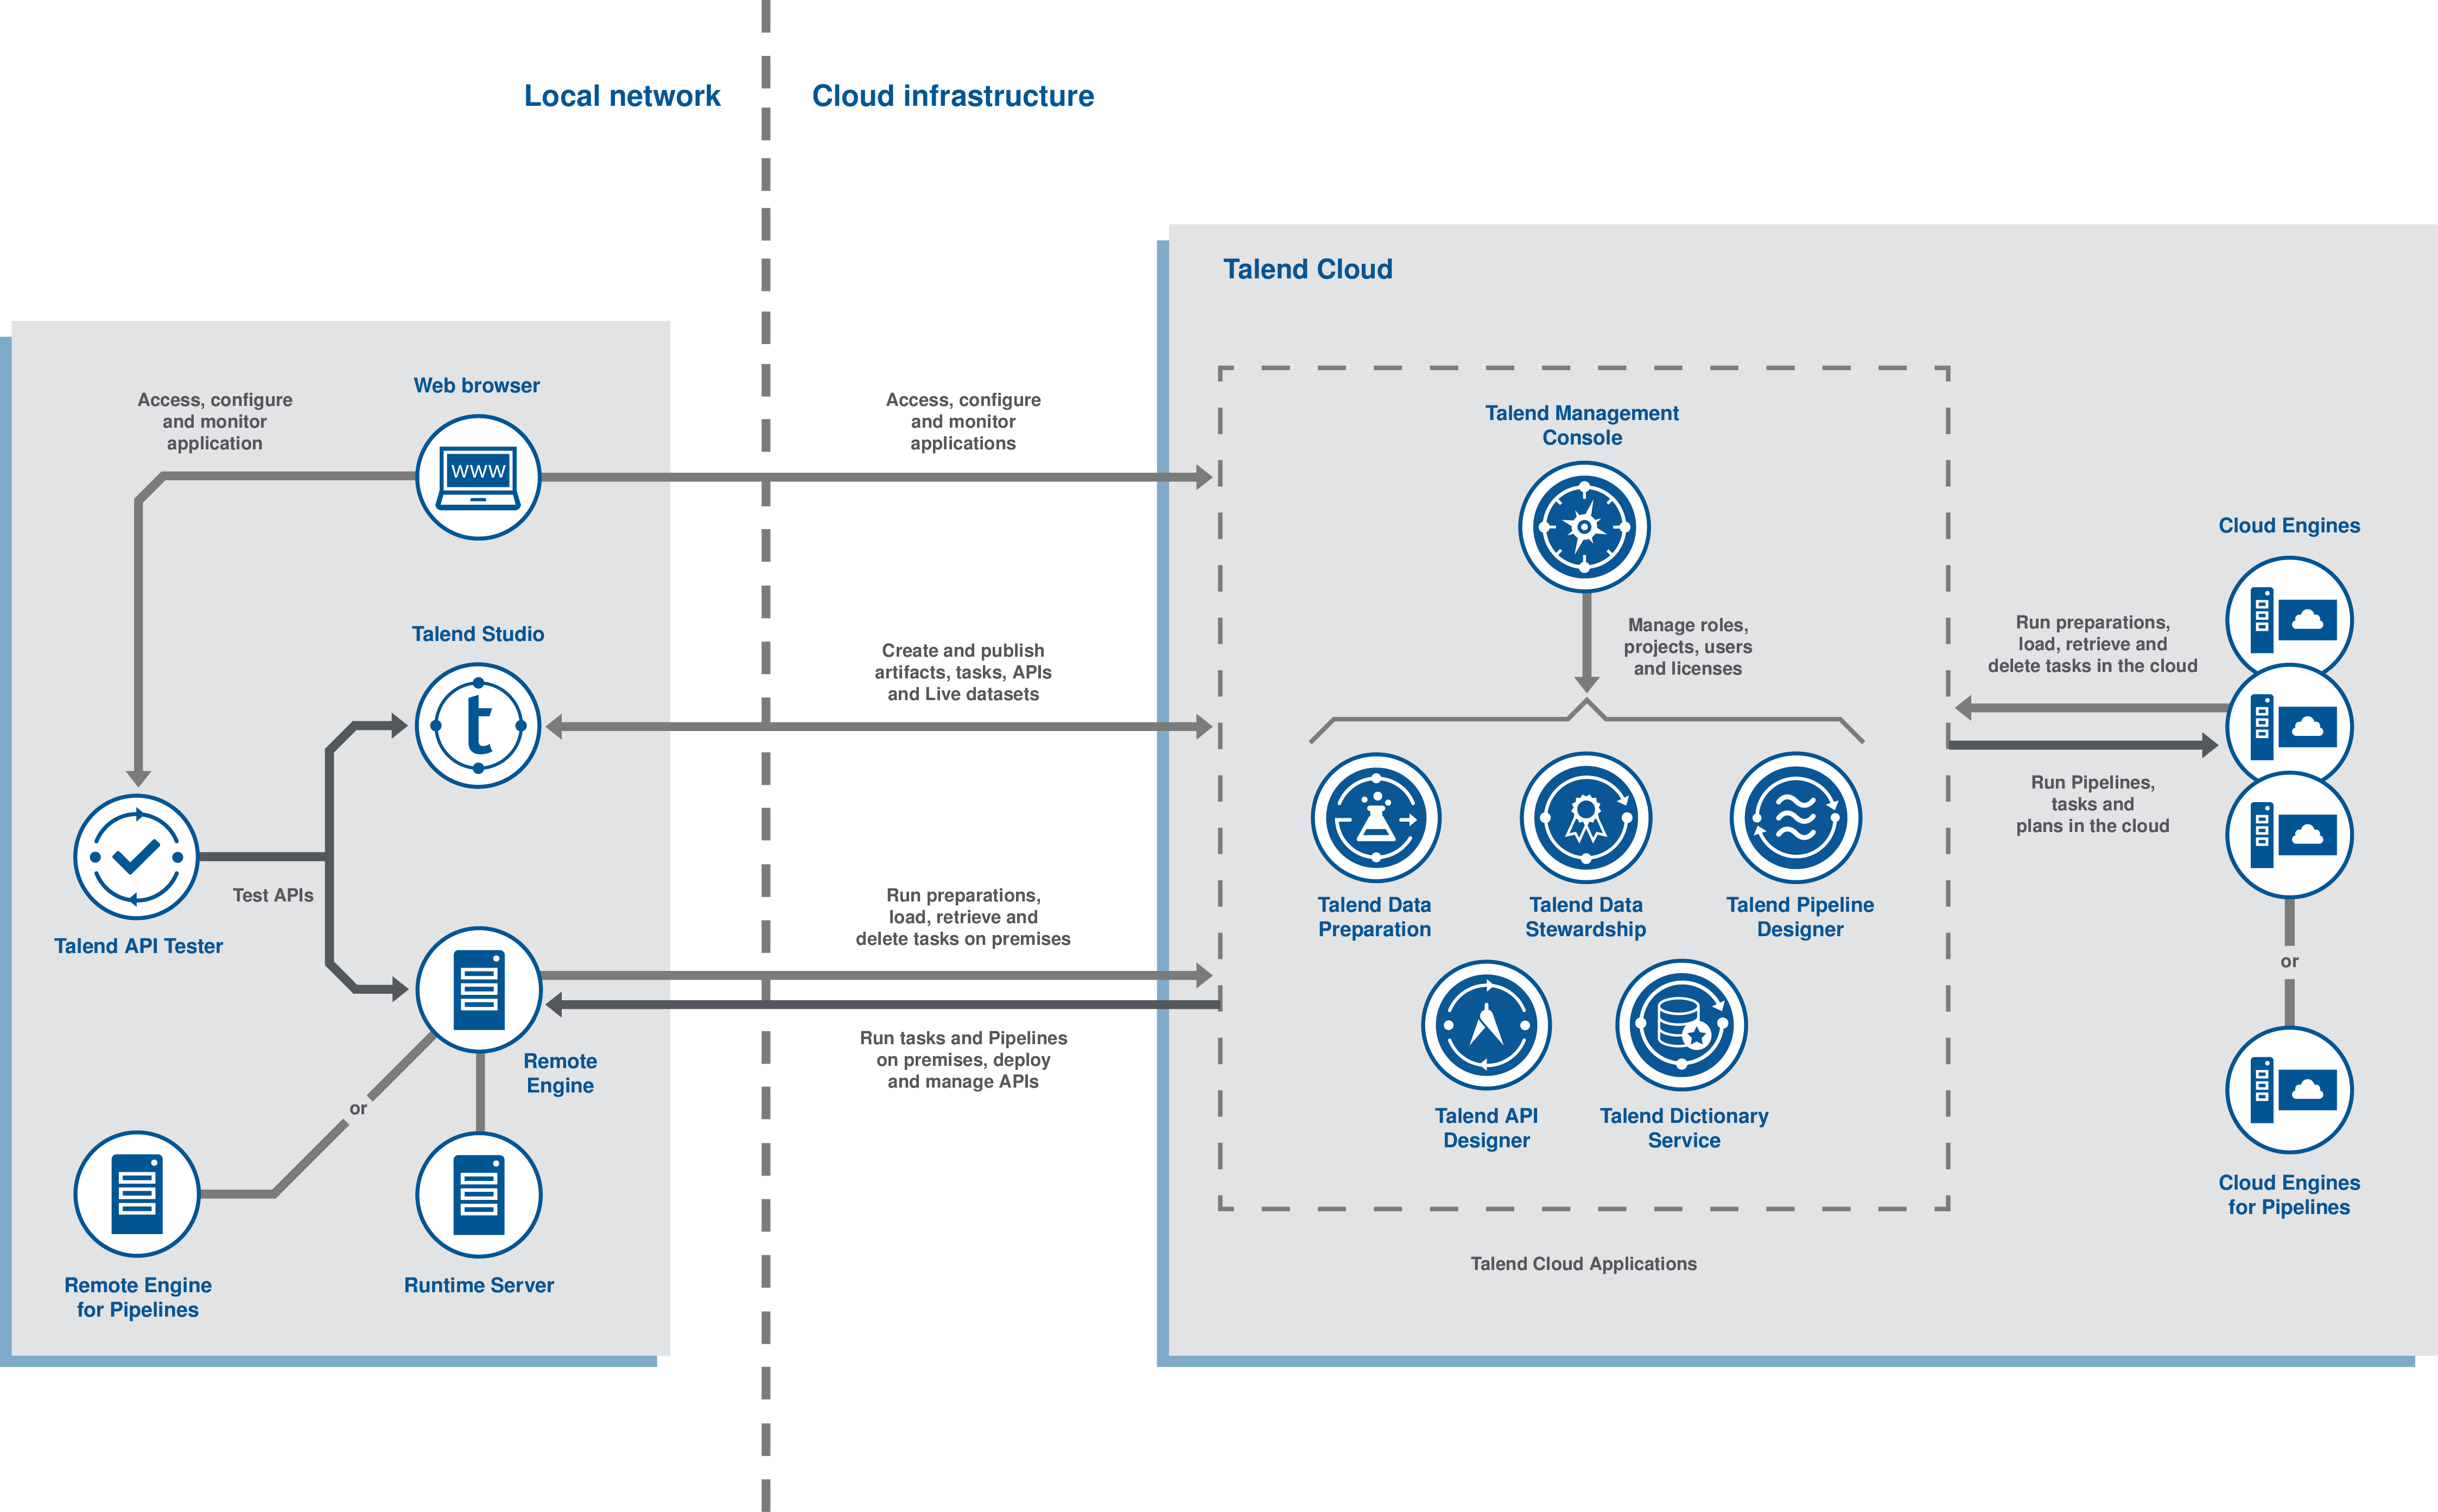 Diagram of where the different Talend Cloud applications are located in the systems and how they interact.